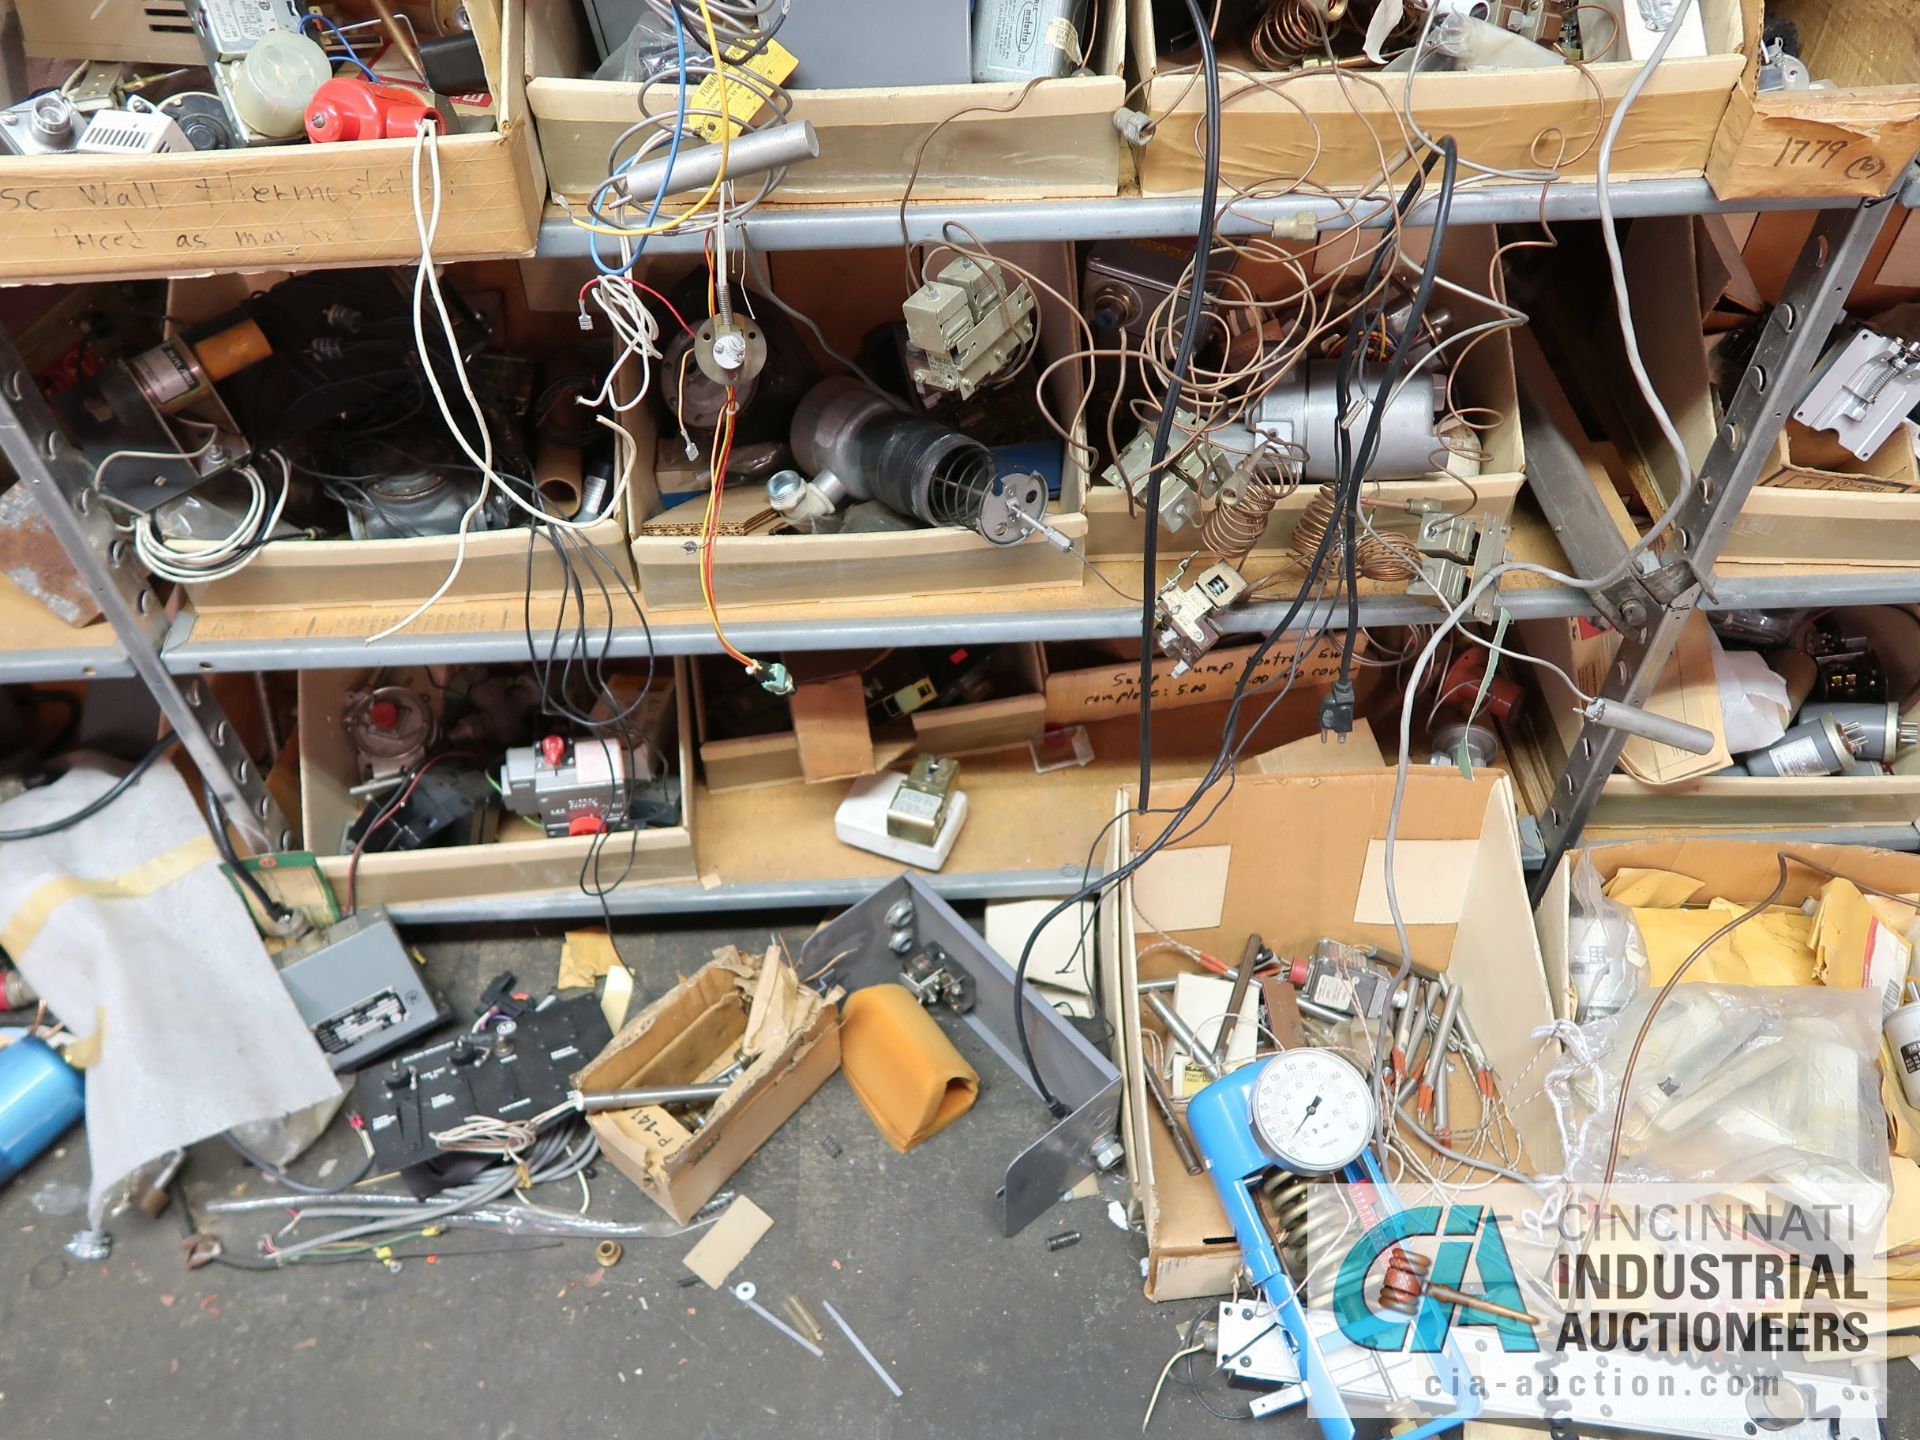 CONTENTS OF (16) SHELVES INCLUDING MISCELLANEOUS VALVES, THERMOSTATS, ANALYZERS, ELECTRICAL, CONTROL - Image 15 of 47